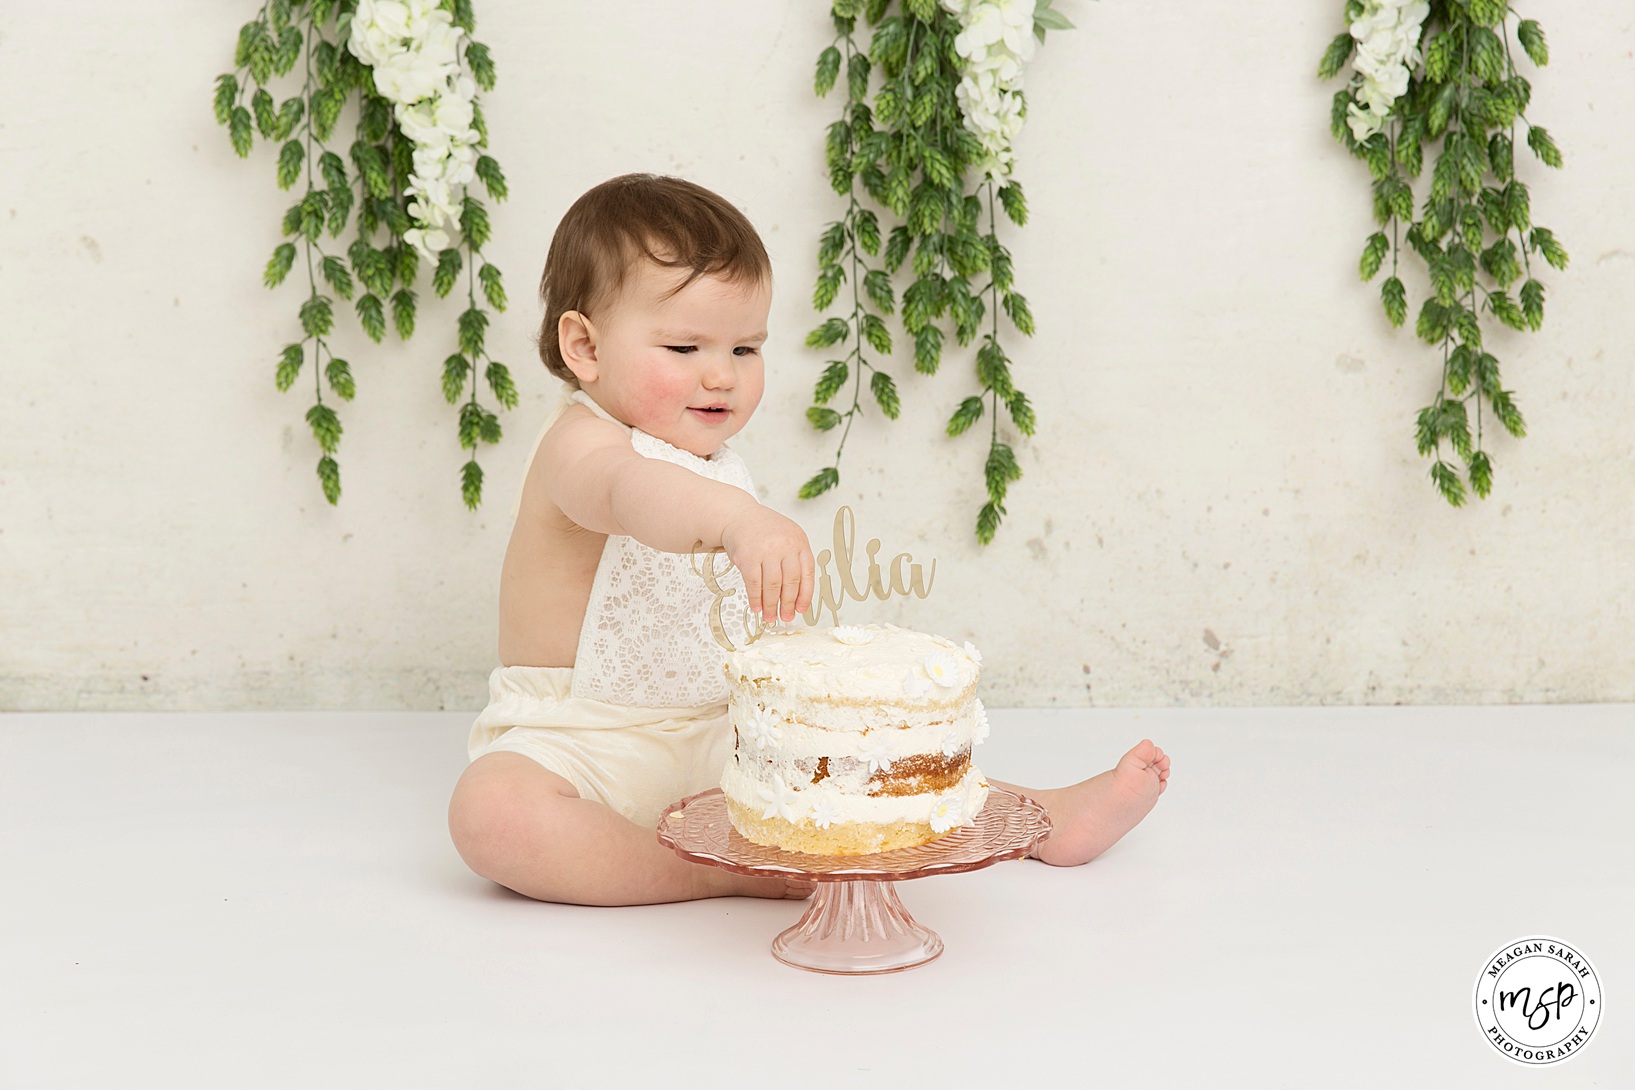 Bash the Cake,Birthday,Birthday Fun,Bunting.,Cake,Cake Smash,Cake Smash Backgrounds,Cake Smash Photo Shoot,Cake Smash Photographer,Cake Smash Set,Children,Floral,Leeds Cake Smashes,Little Girl,Meagan Sarah Photography,Messy,One Year Old,Photo Fun,babies,